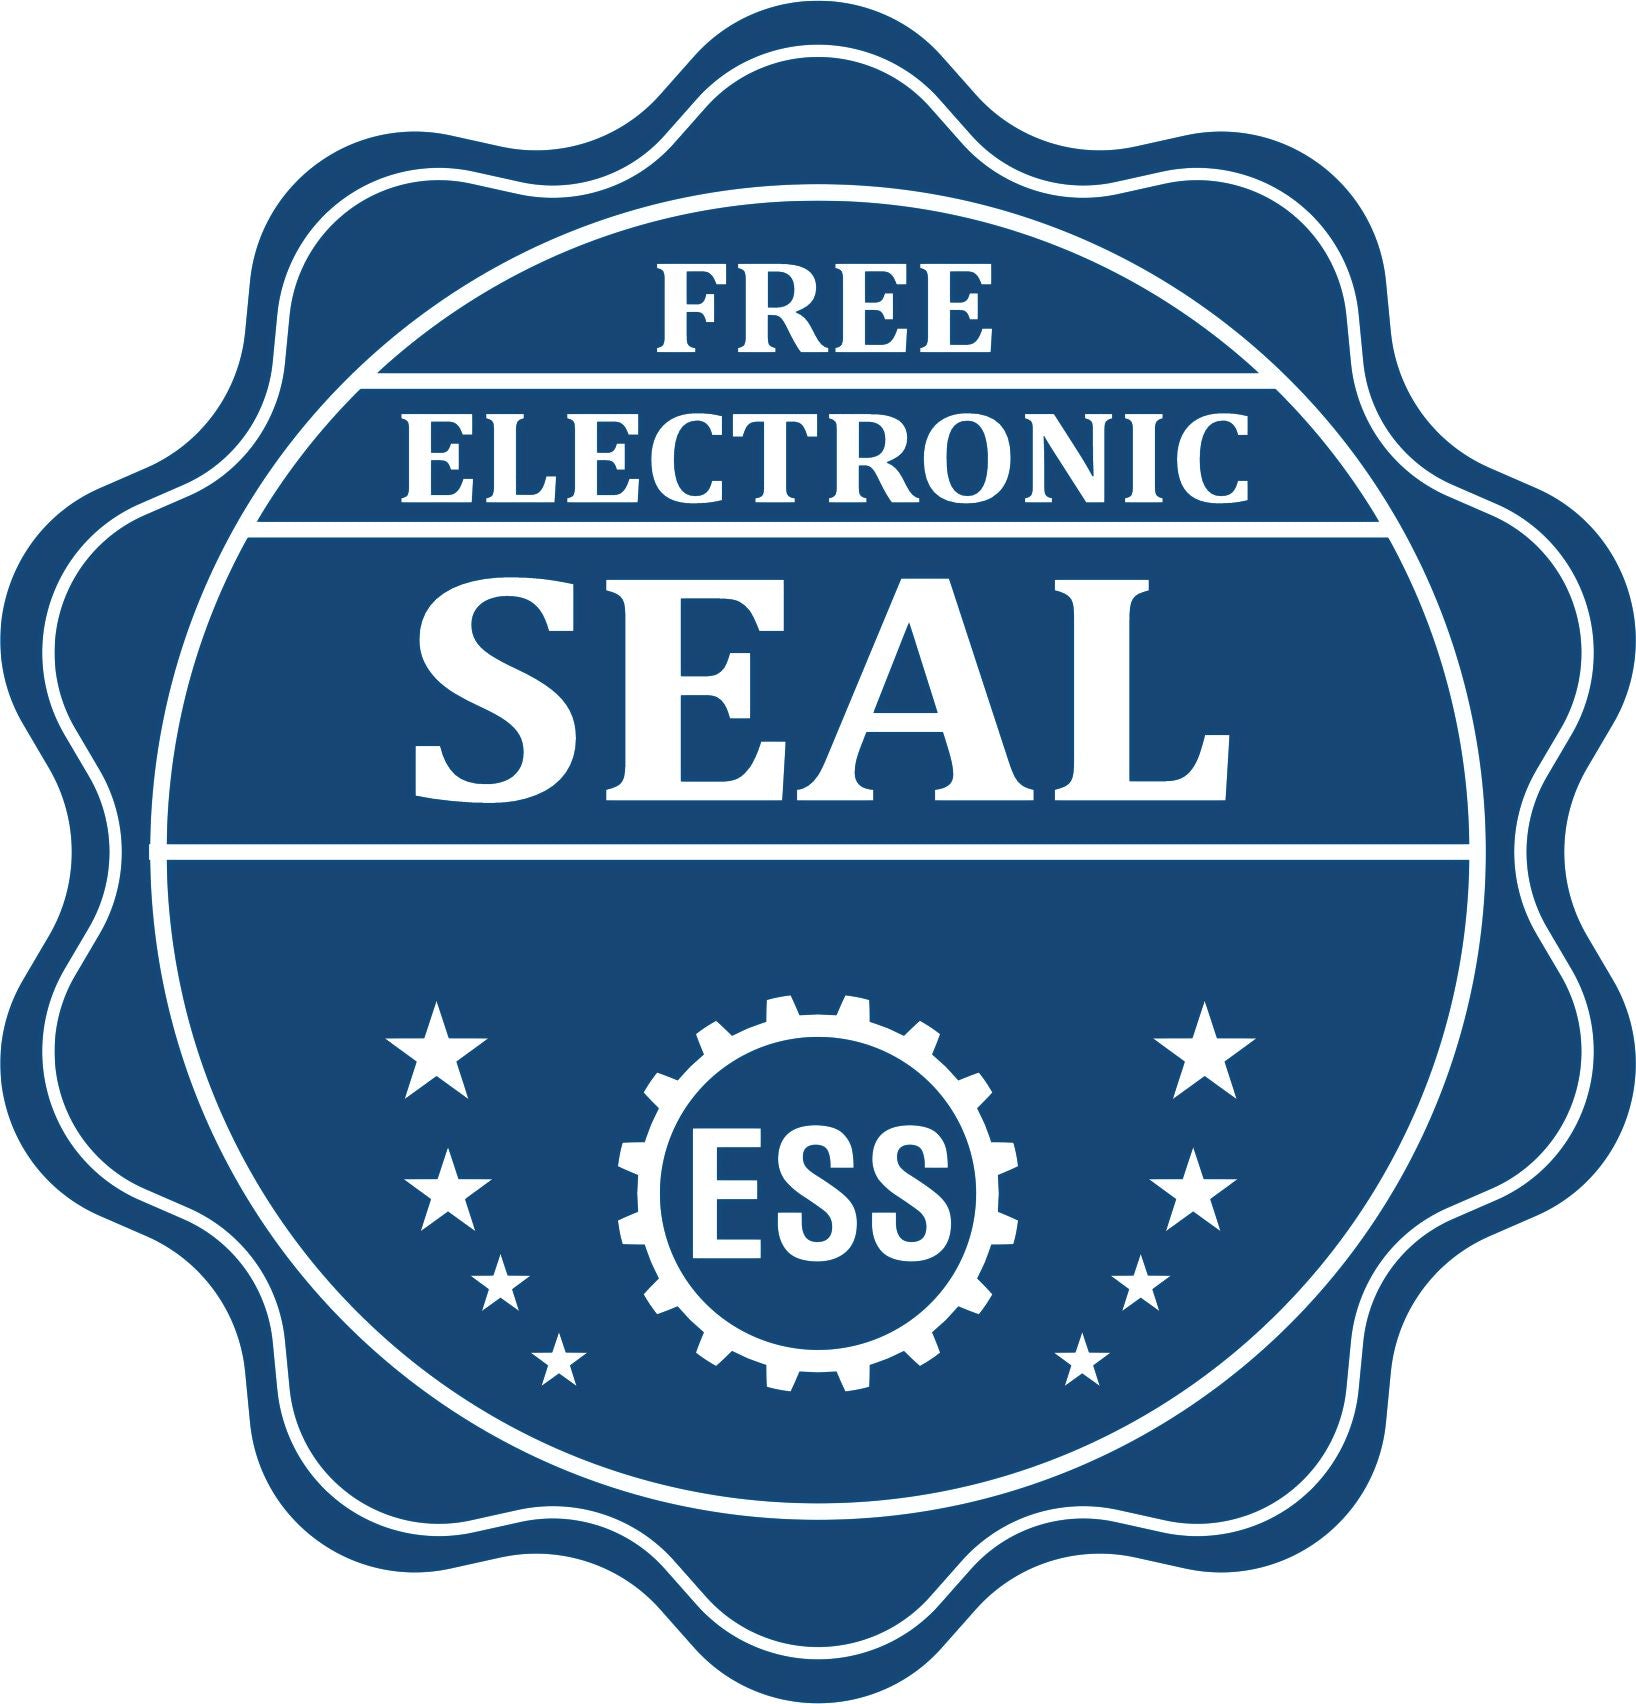 A badge showing a free electronic seal for the Handheld Maryland Professional Engineer Embosser with stars and the ESS gear on the emblem.